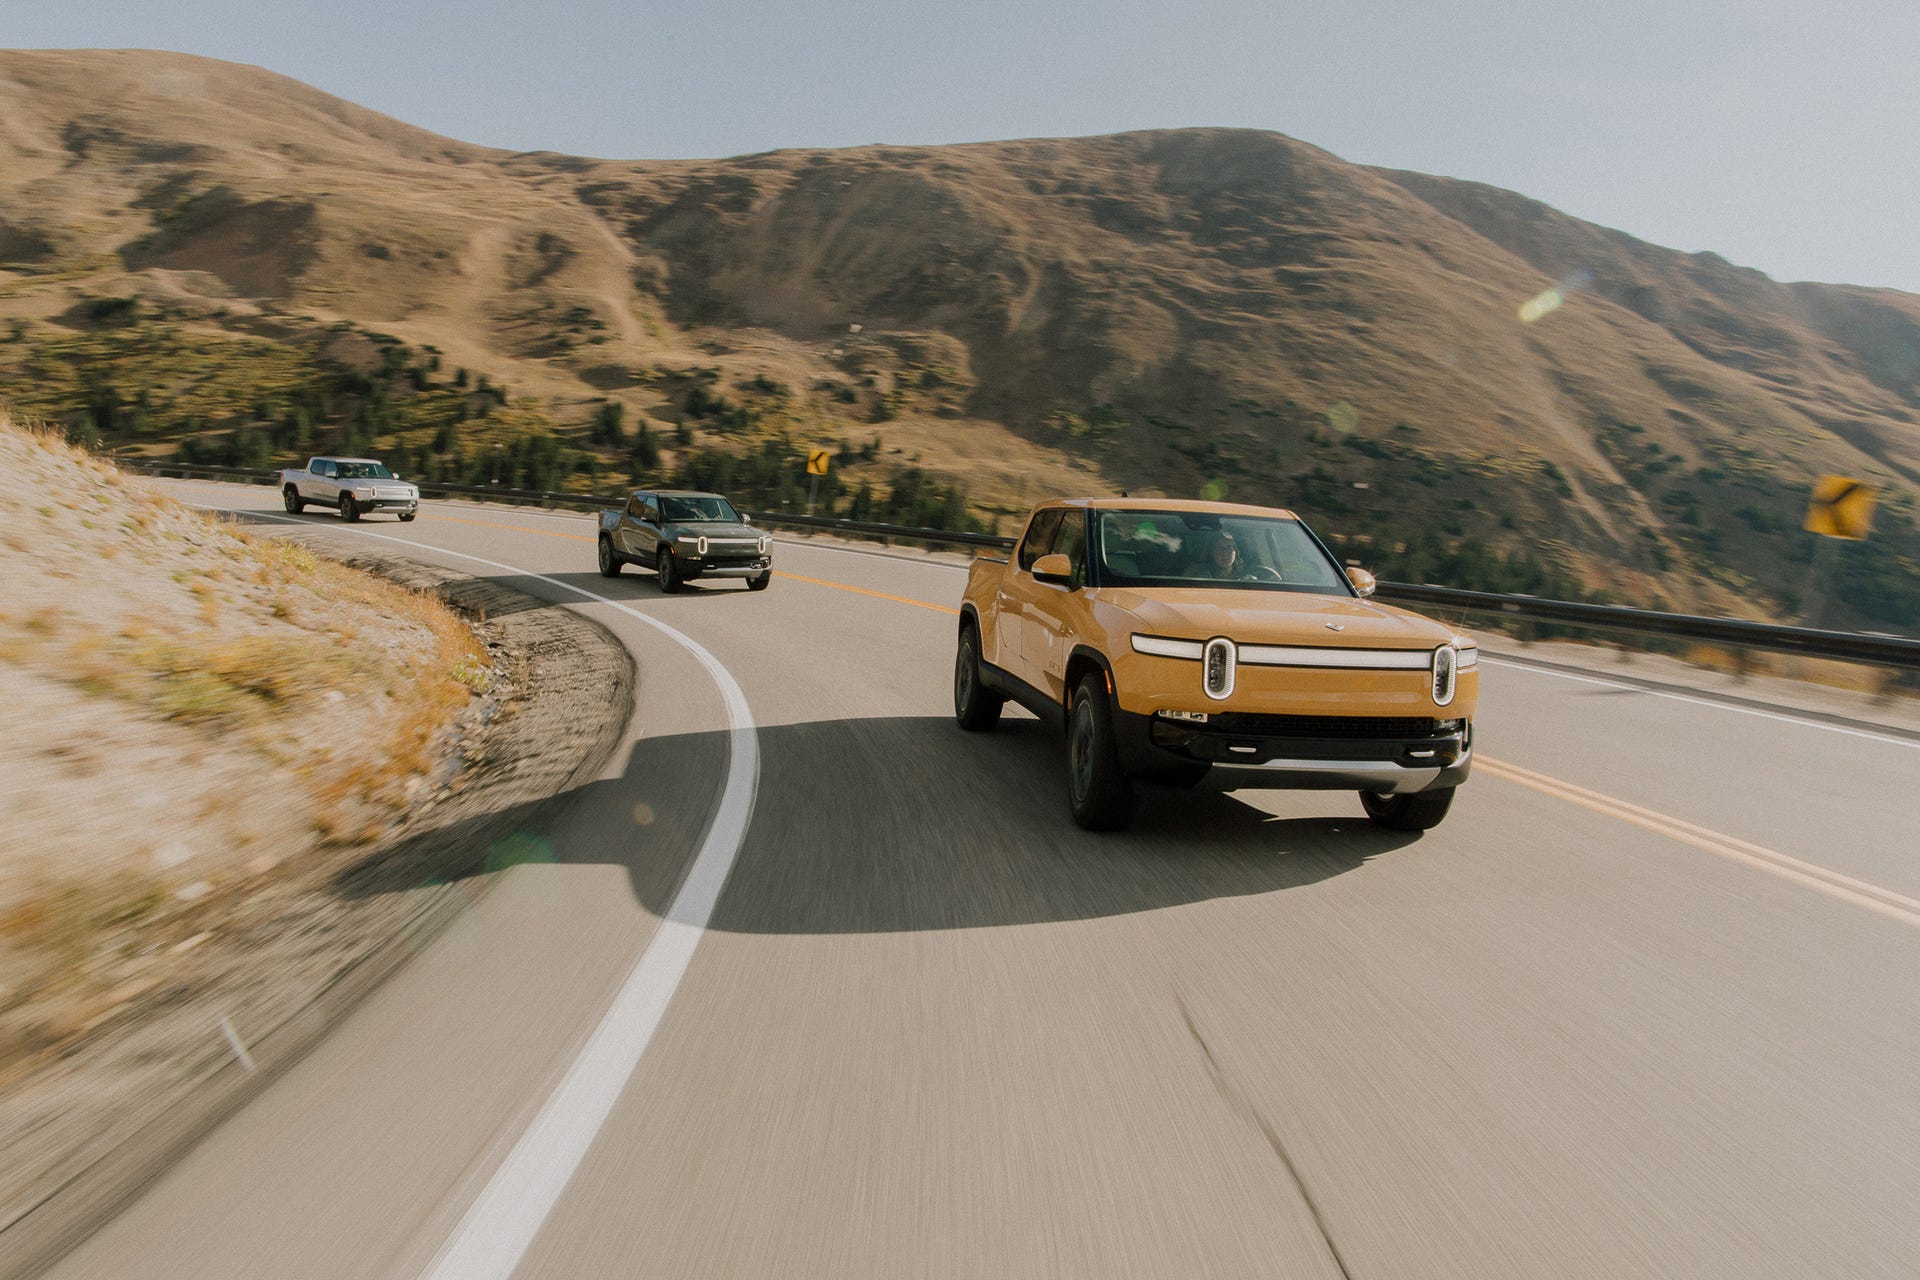 2022 Rivian R1T on a road in the hills